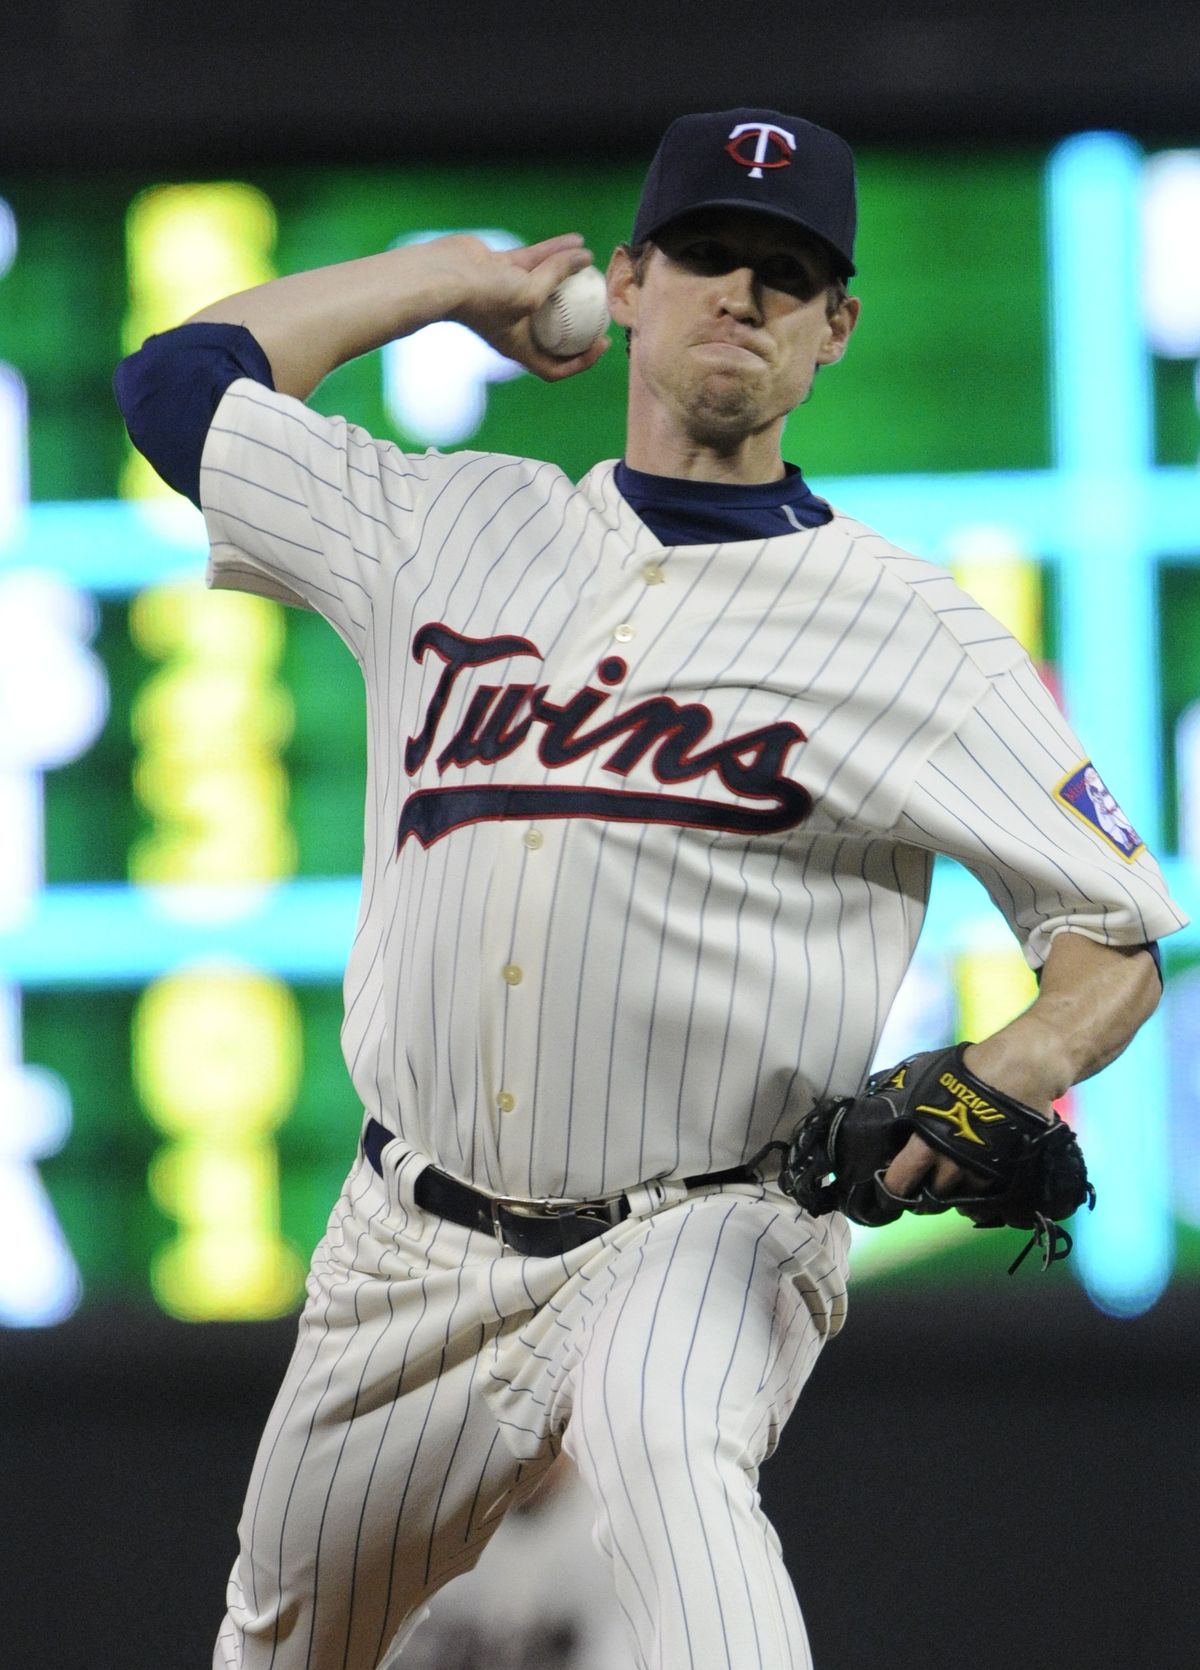 Minnesota Twins pitcher Kevin Slowey throws against the Seattle Mariners in the first inning of a baseball game on Wednesday, Sept. 21, 2011, in Minneapolis. (Jim Mone / Associated Press)